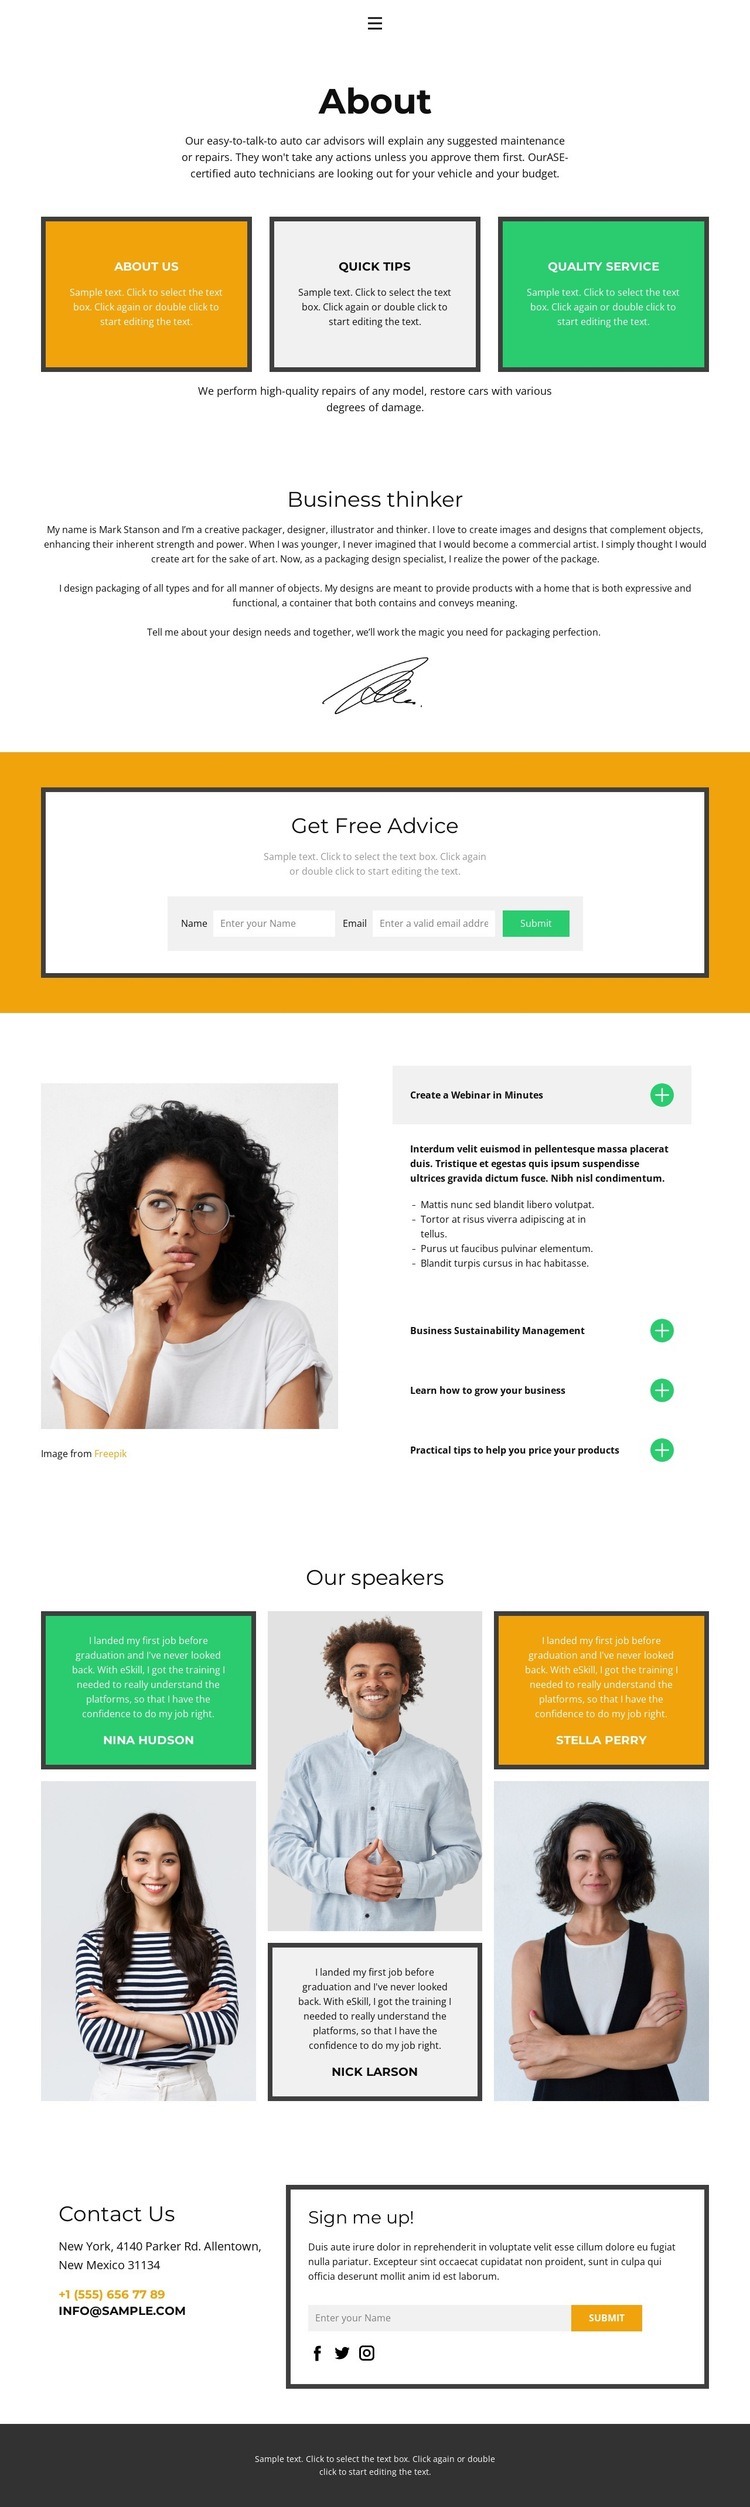 Read and find answers Squarespace Template Alternative